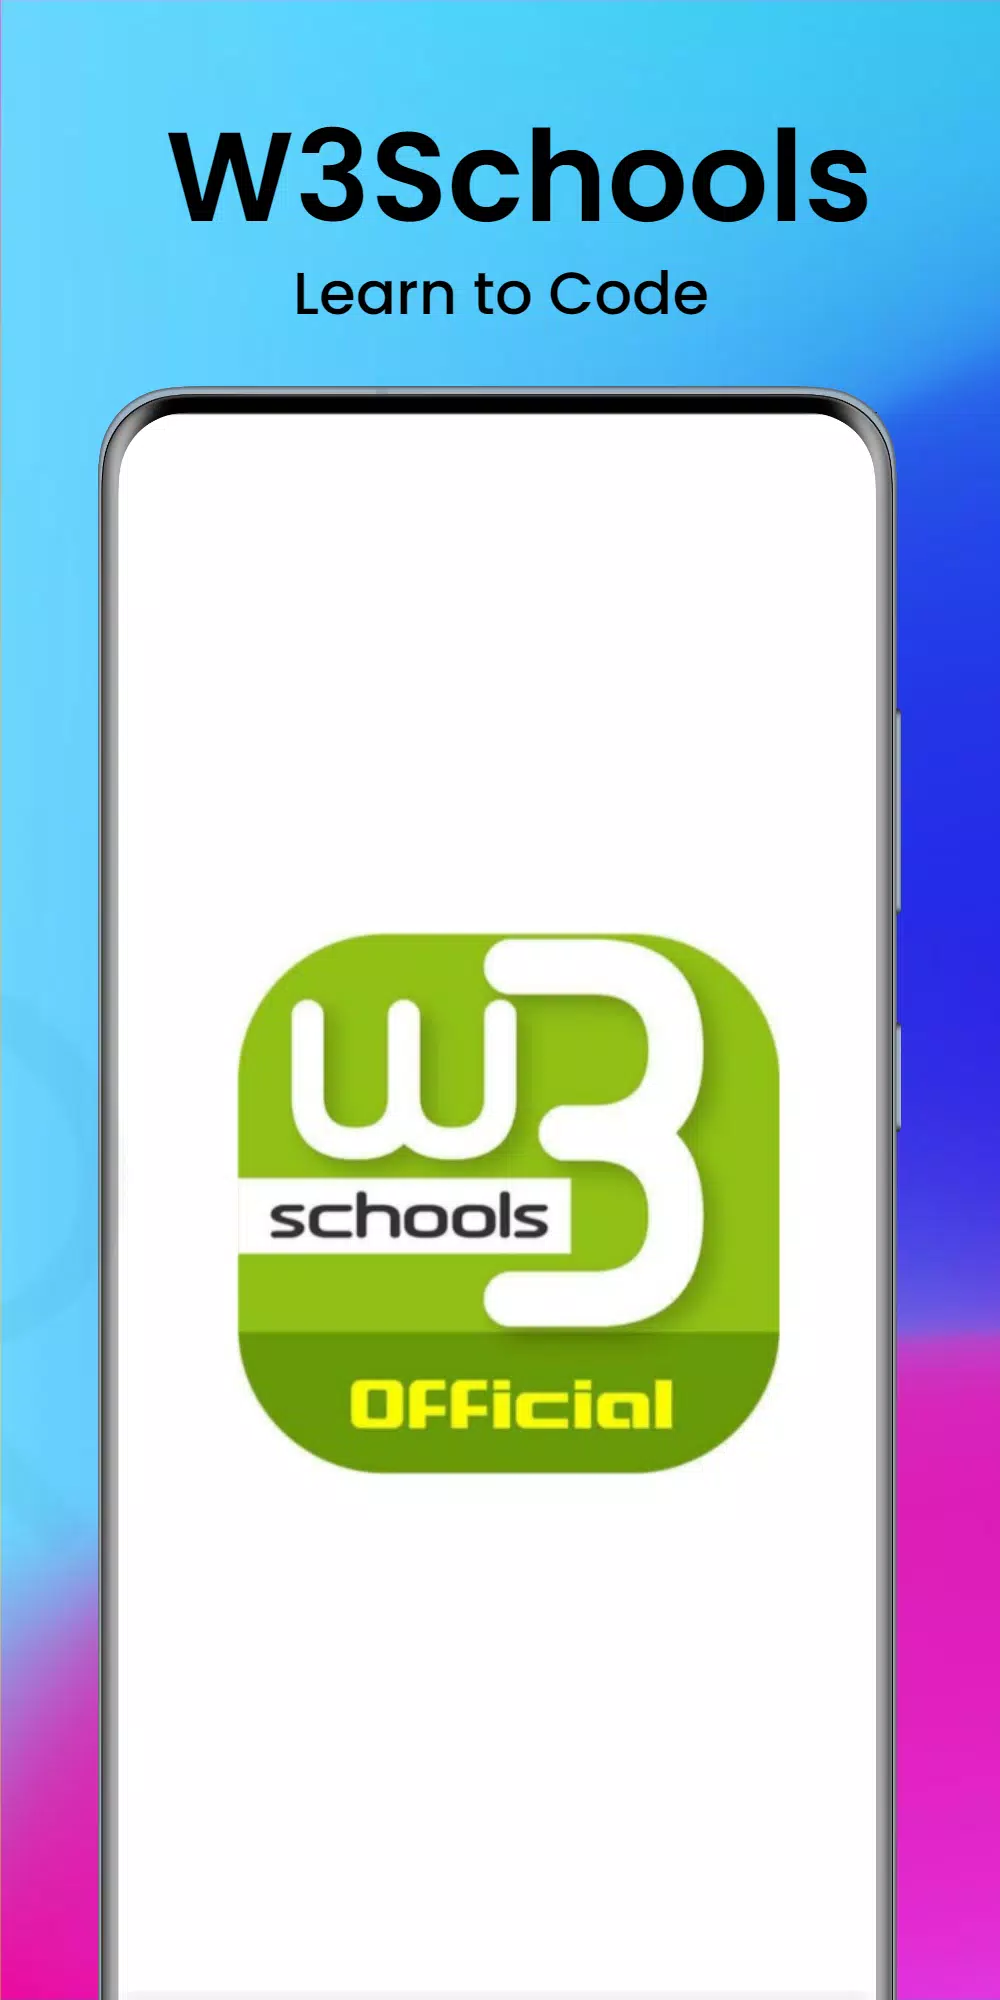 W3schools MOD APK Download v2 For Android – (Latest Version 5